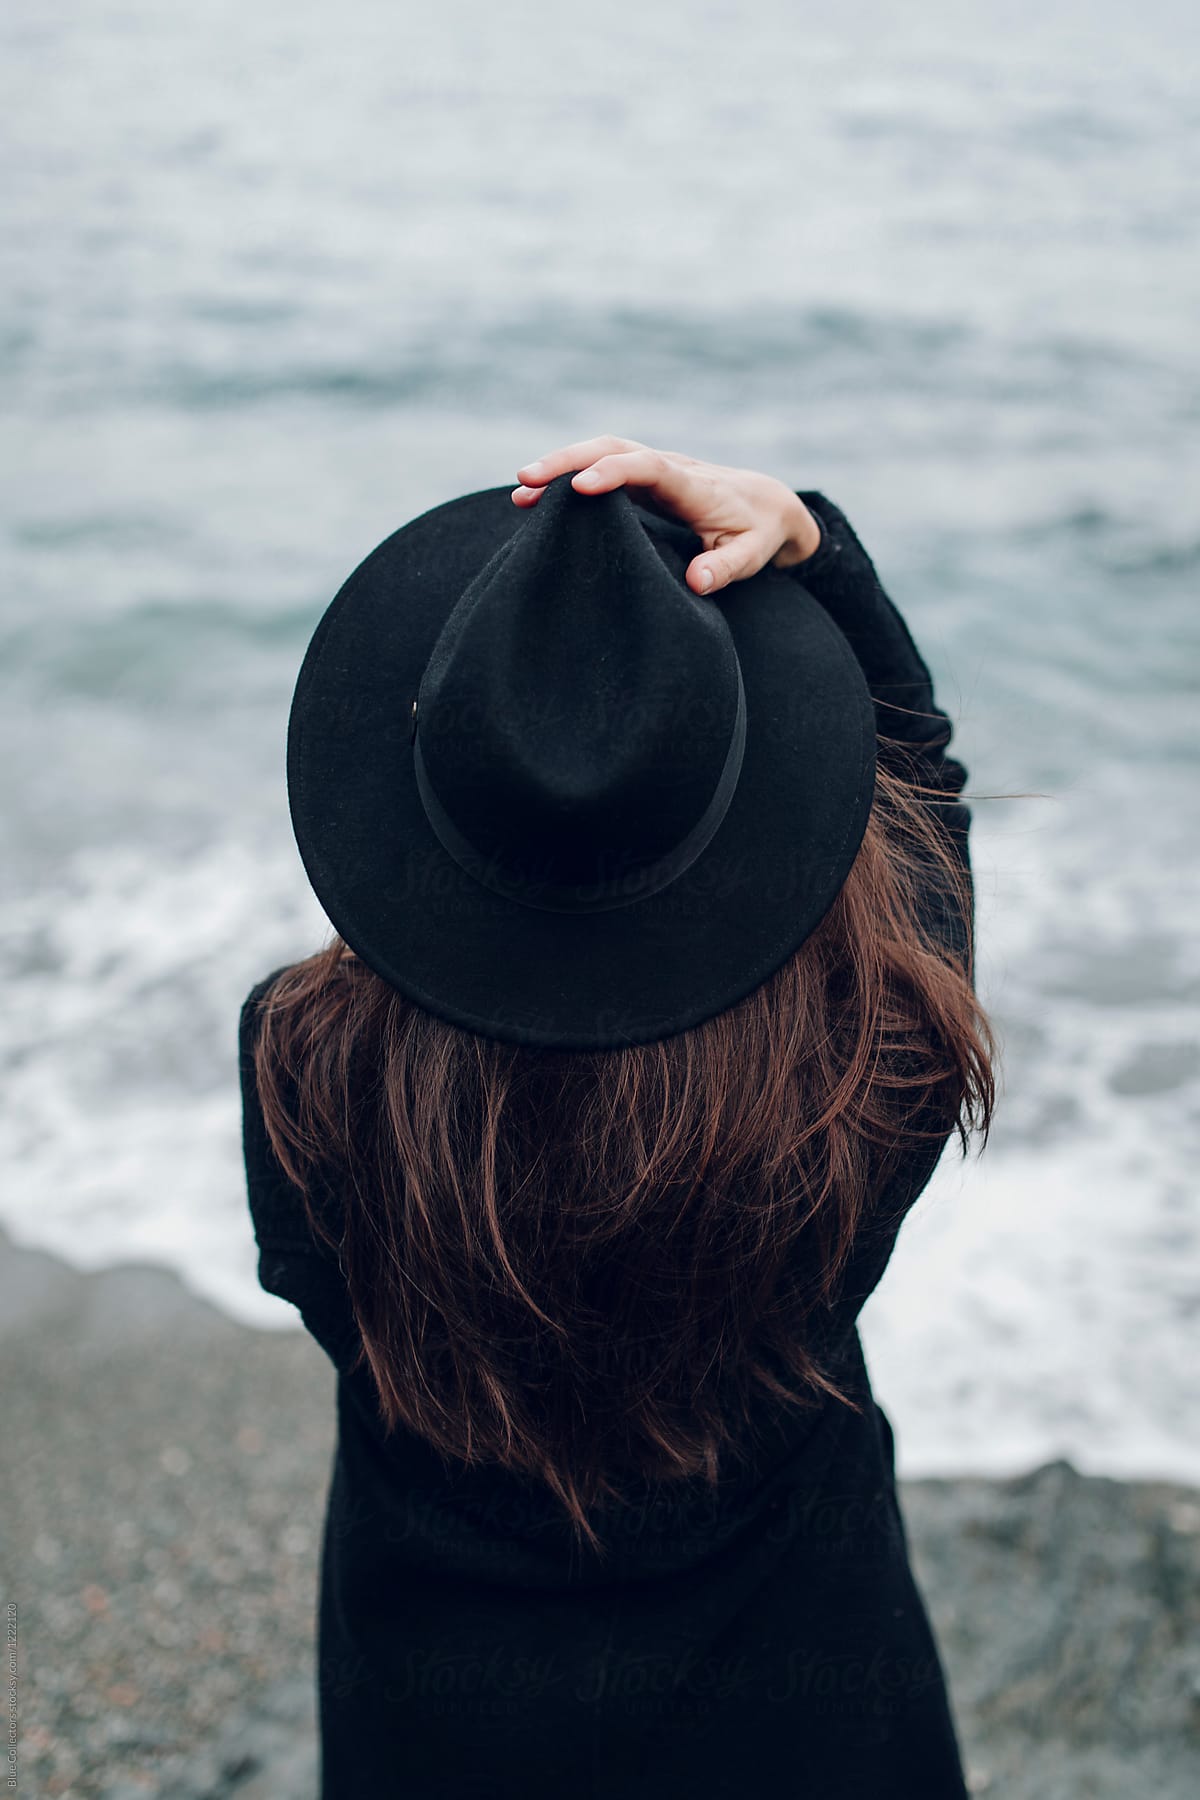 Woman With A Hat Staring At The Sea In A Winter Day By Stocksy Contributor Blue Collectors 